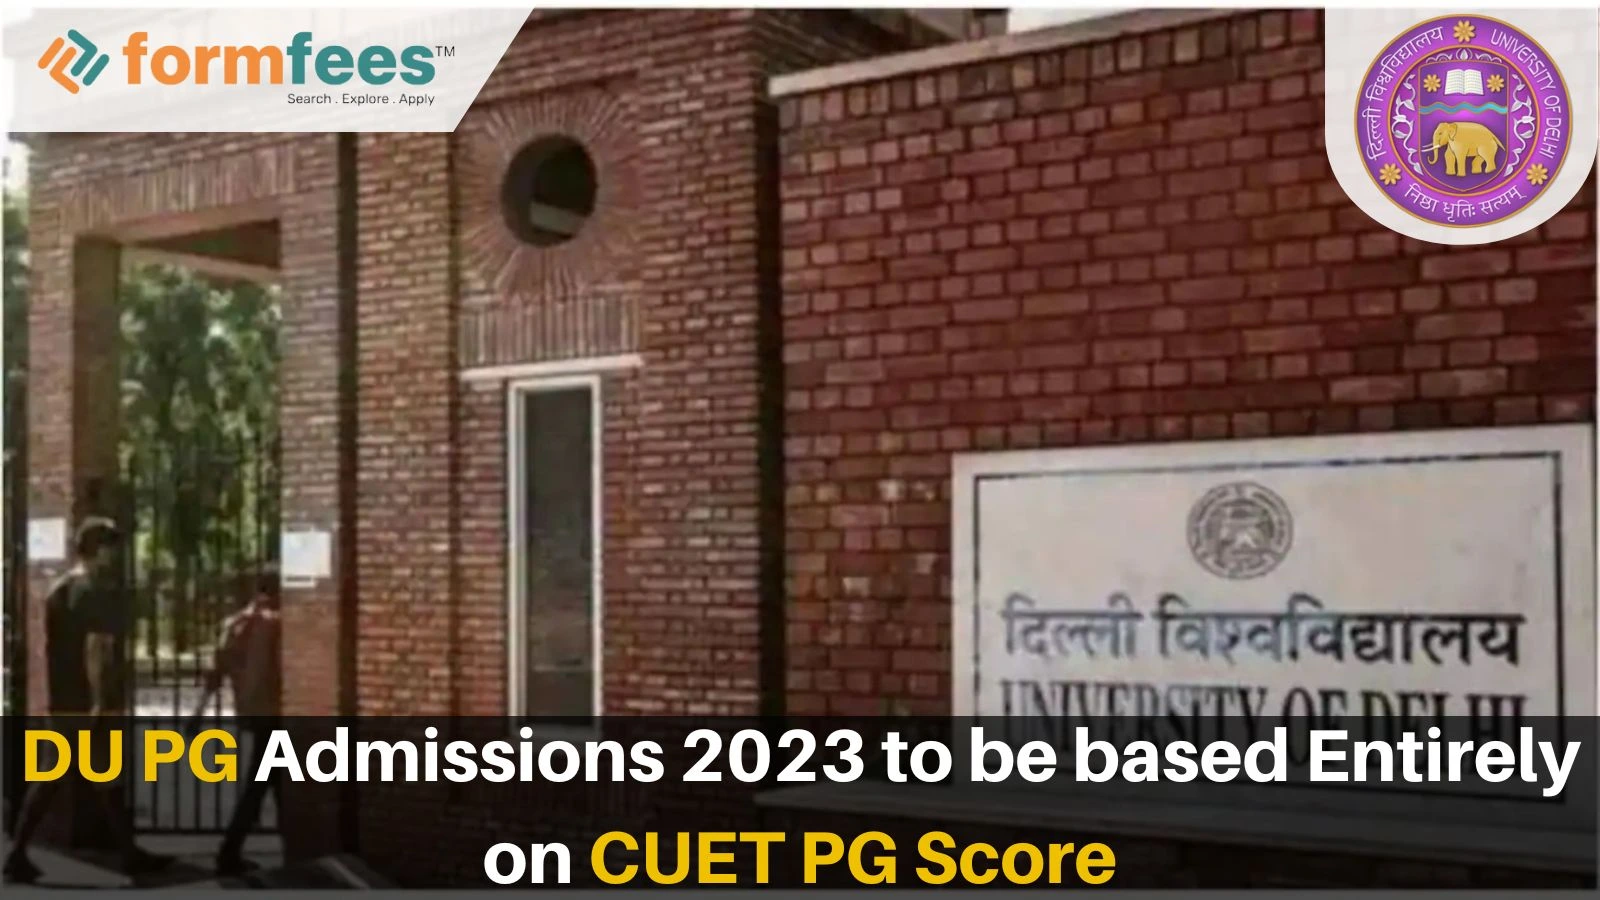 DU PG Admissions 2023 to be based Entirely on CUET PG Score